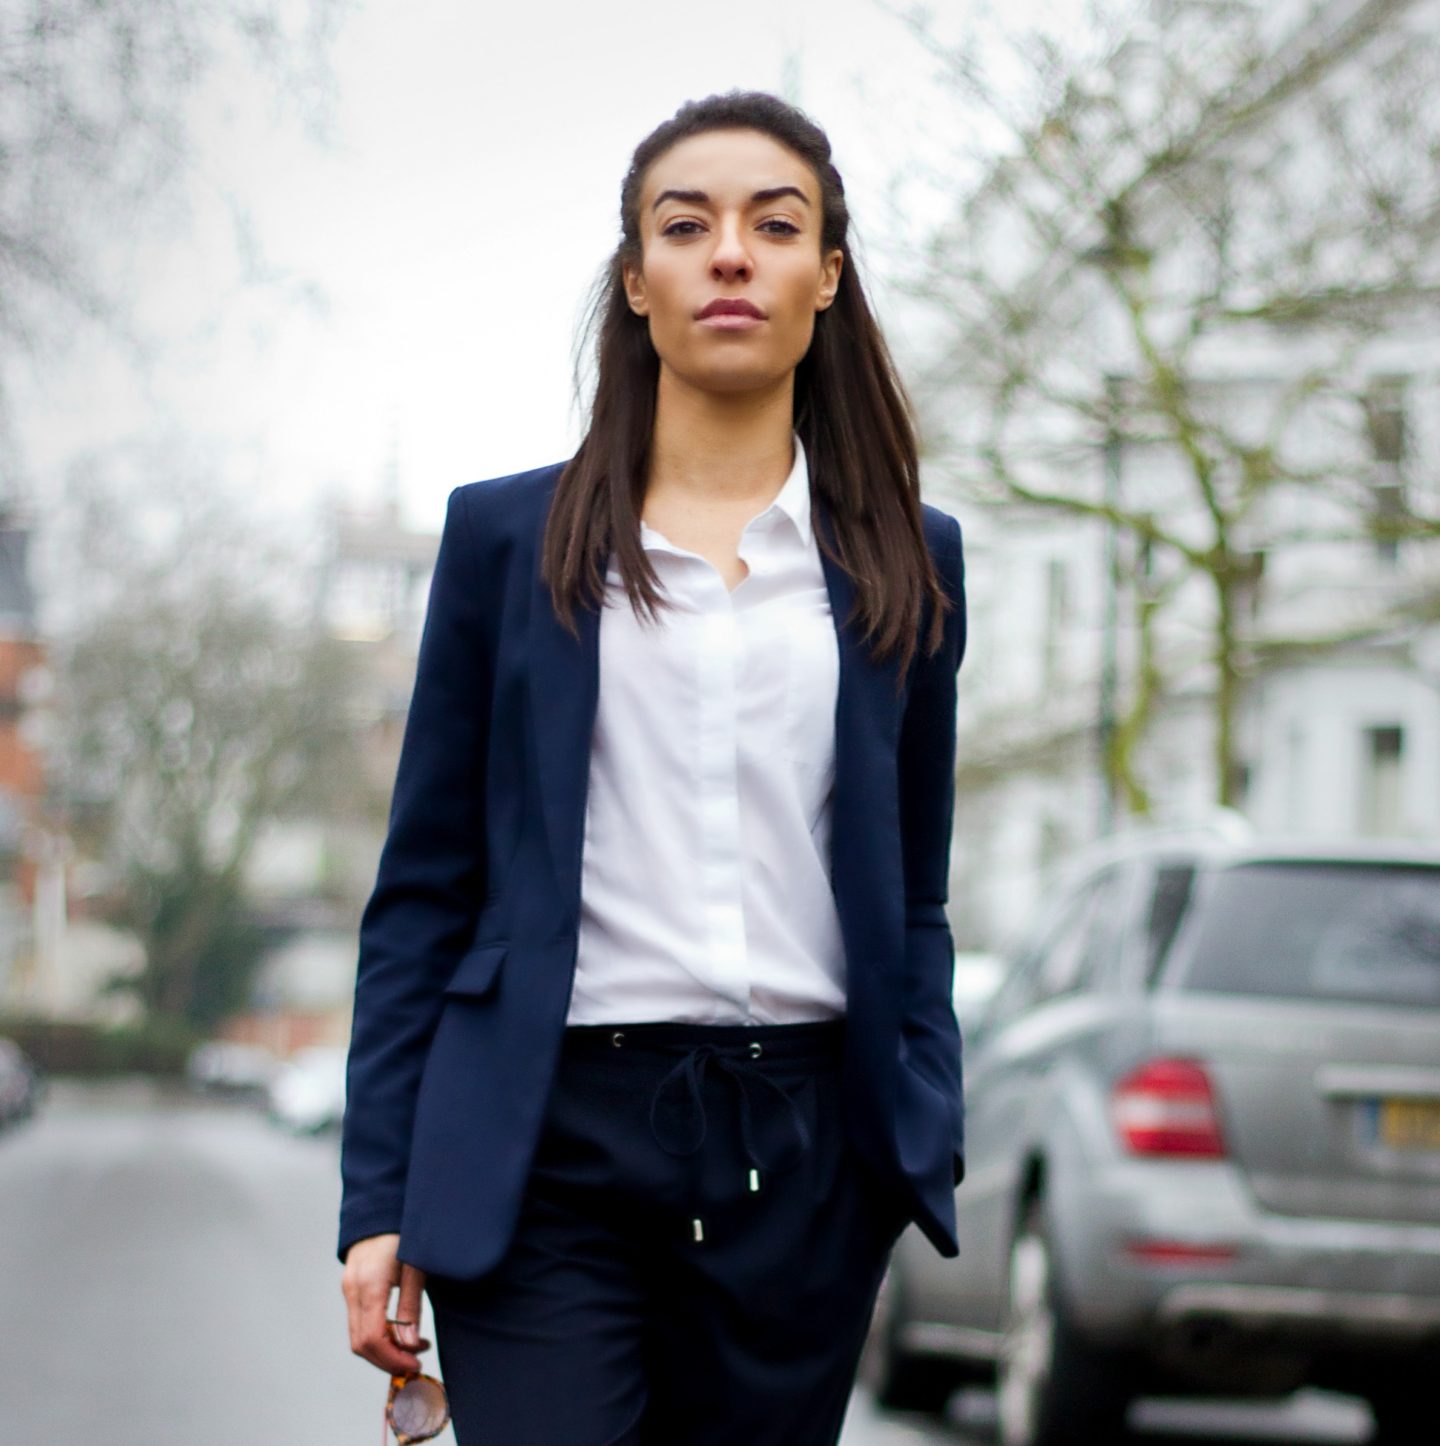 How to Wear a Jumpsuit to Work - Corporate Style Story